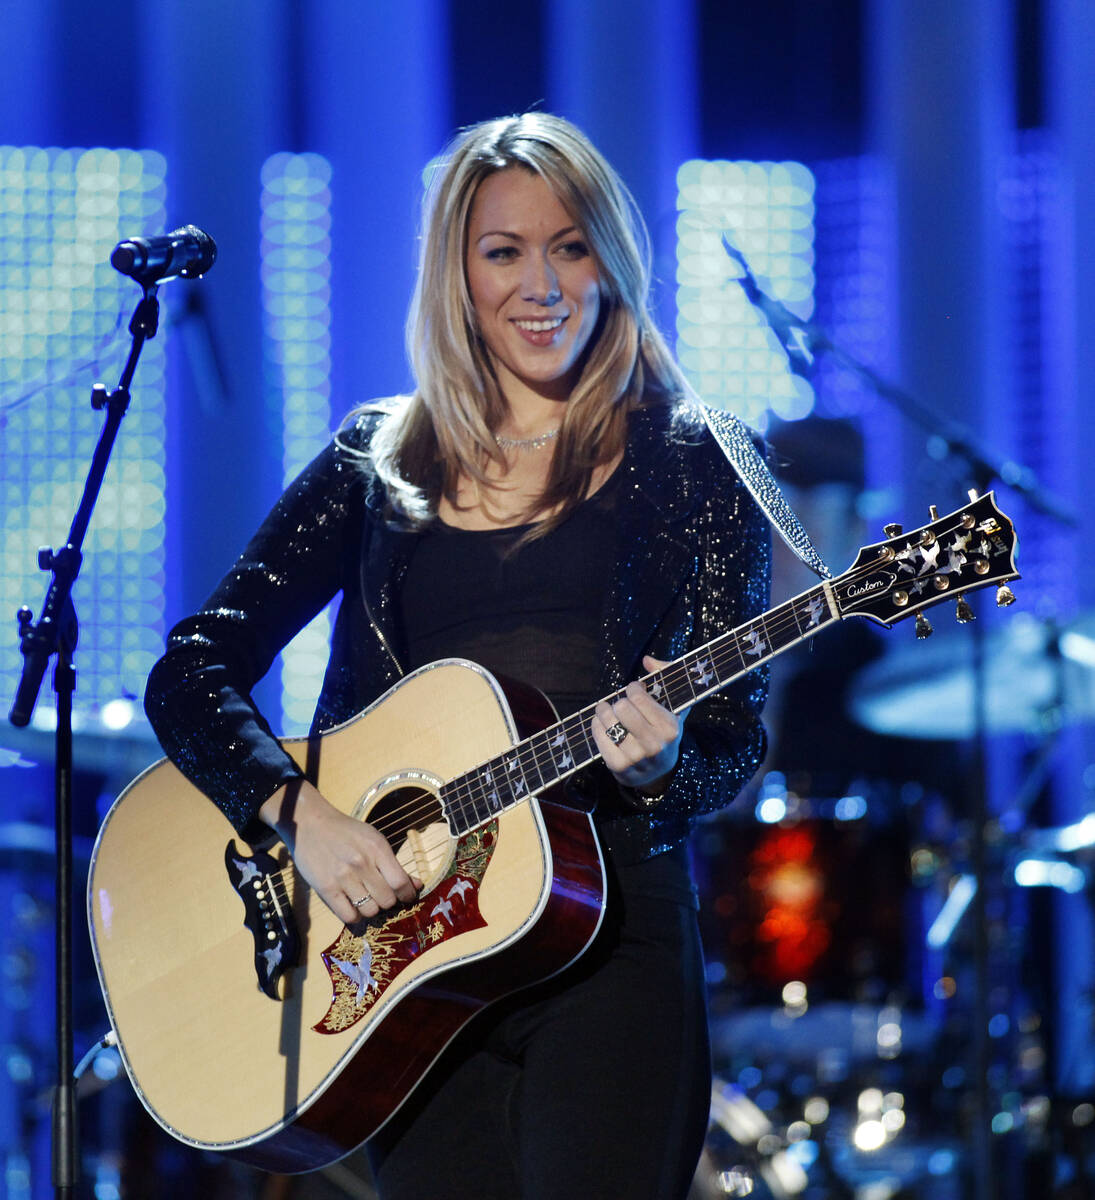 In this Dec. 11, 2010 file photo, singer Colbie Caillat performs at the Nobel Peace concert in ...